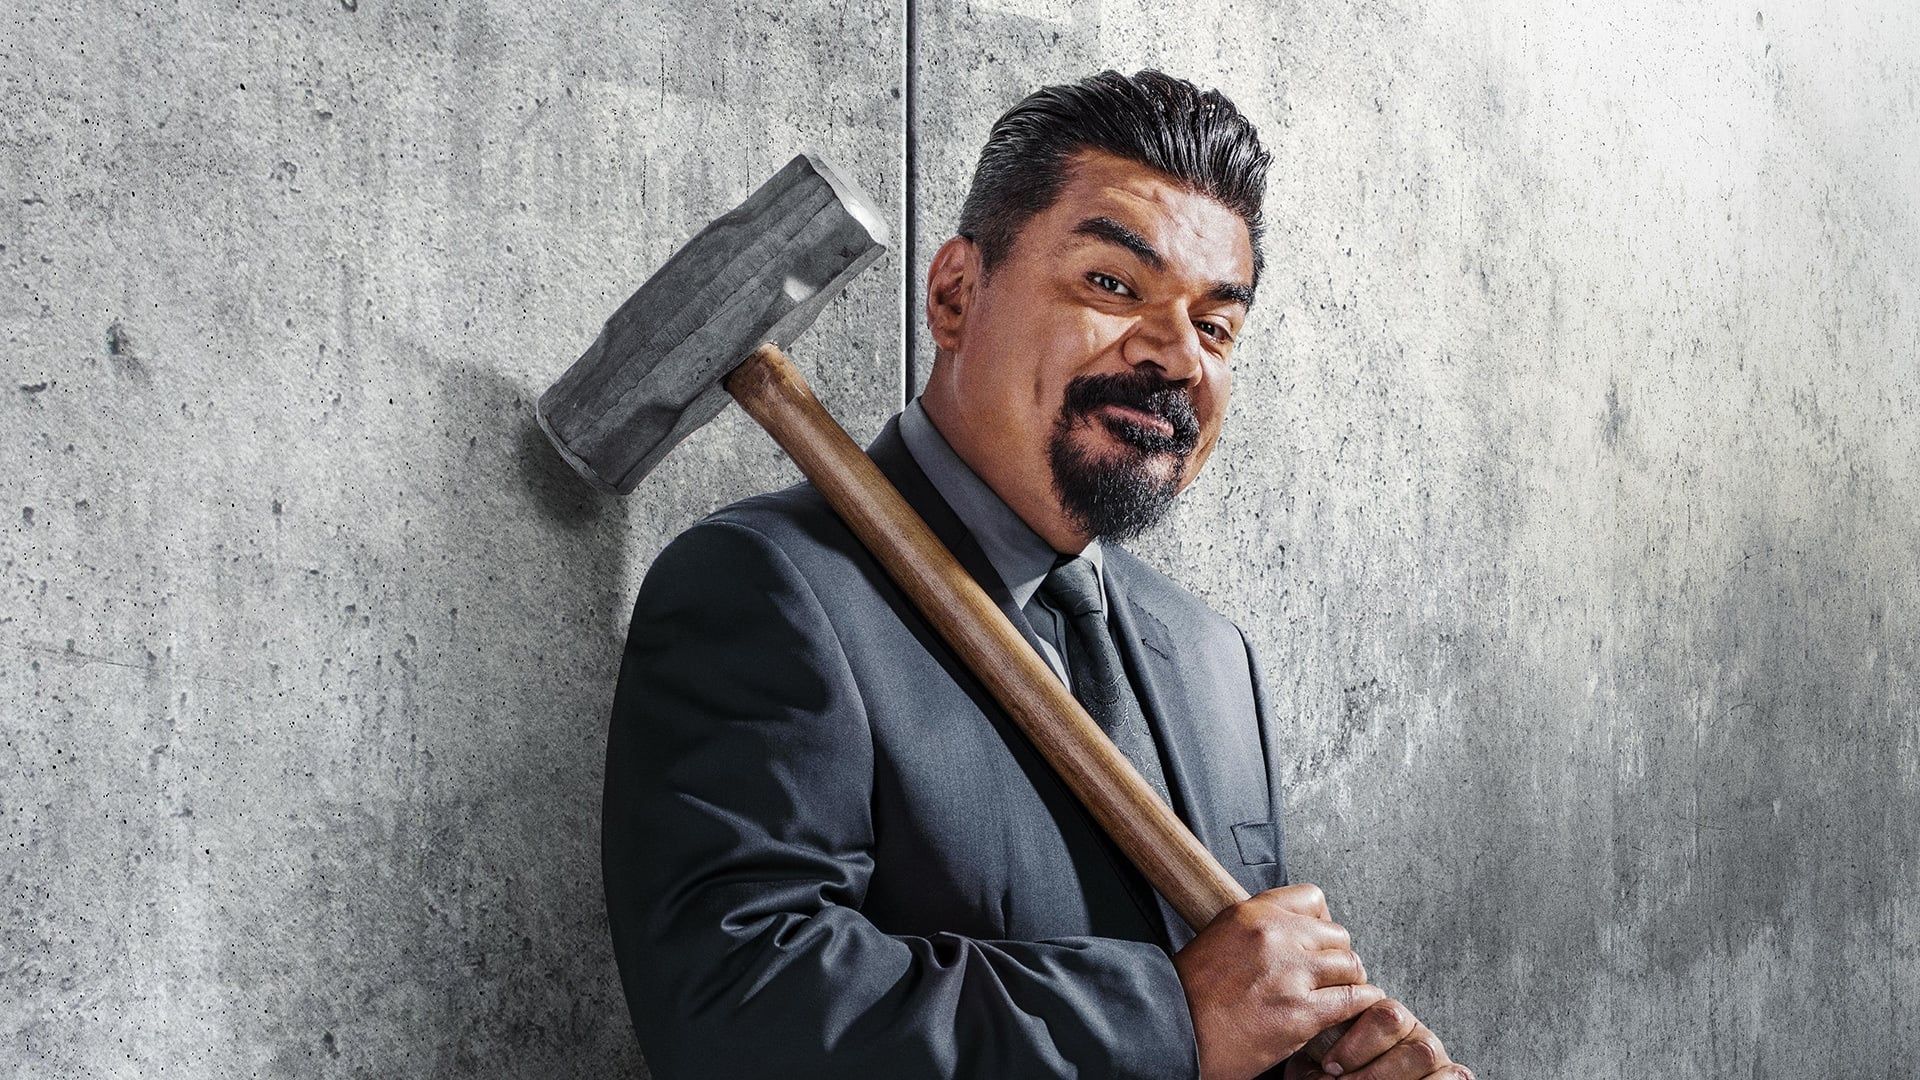 George Lopez: The Wall, Live from Washington D.C. background